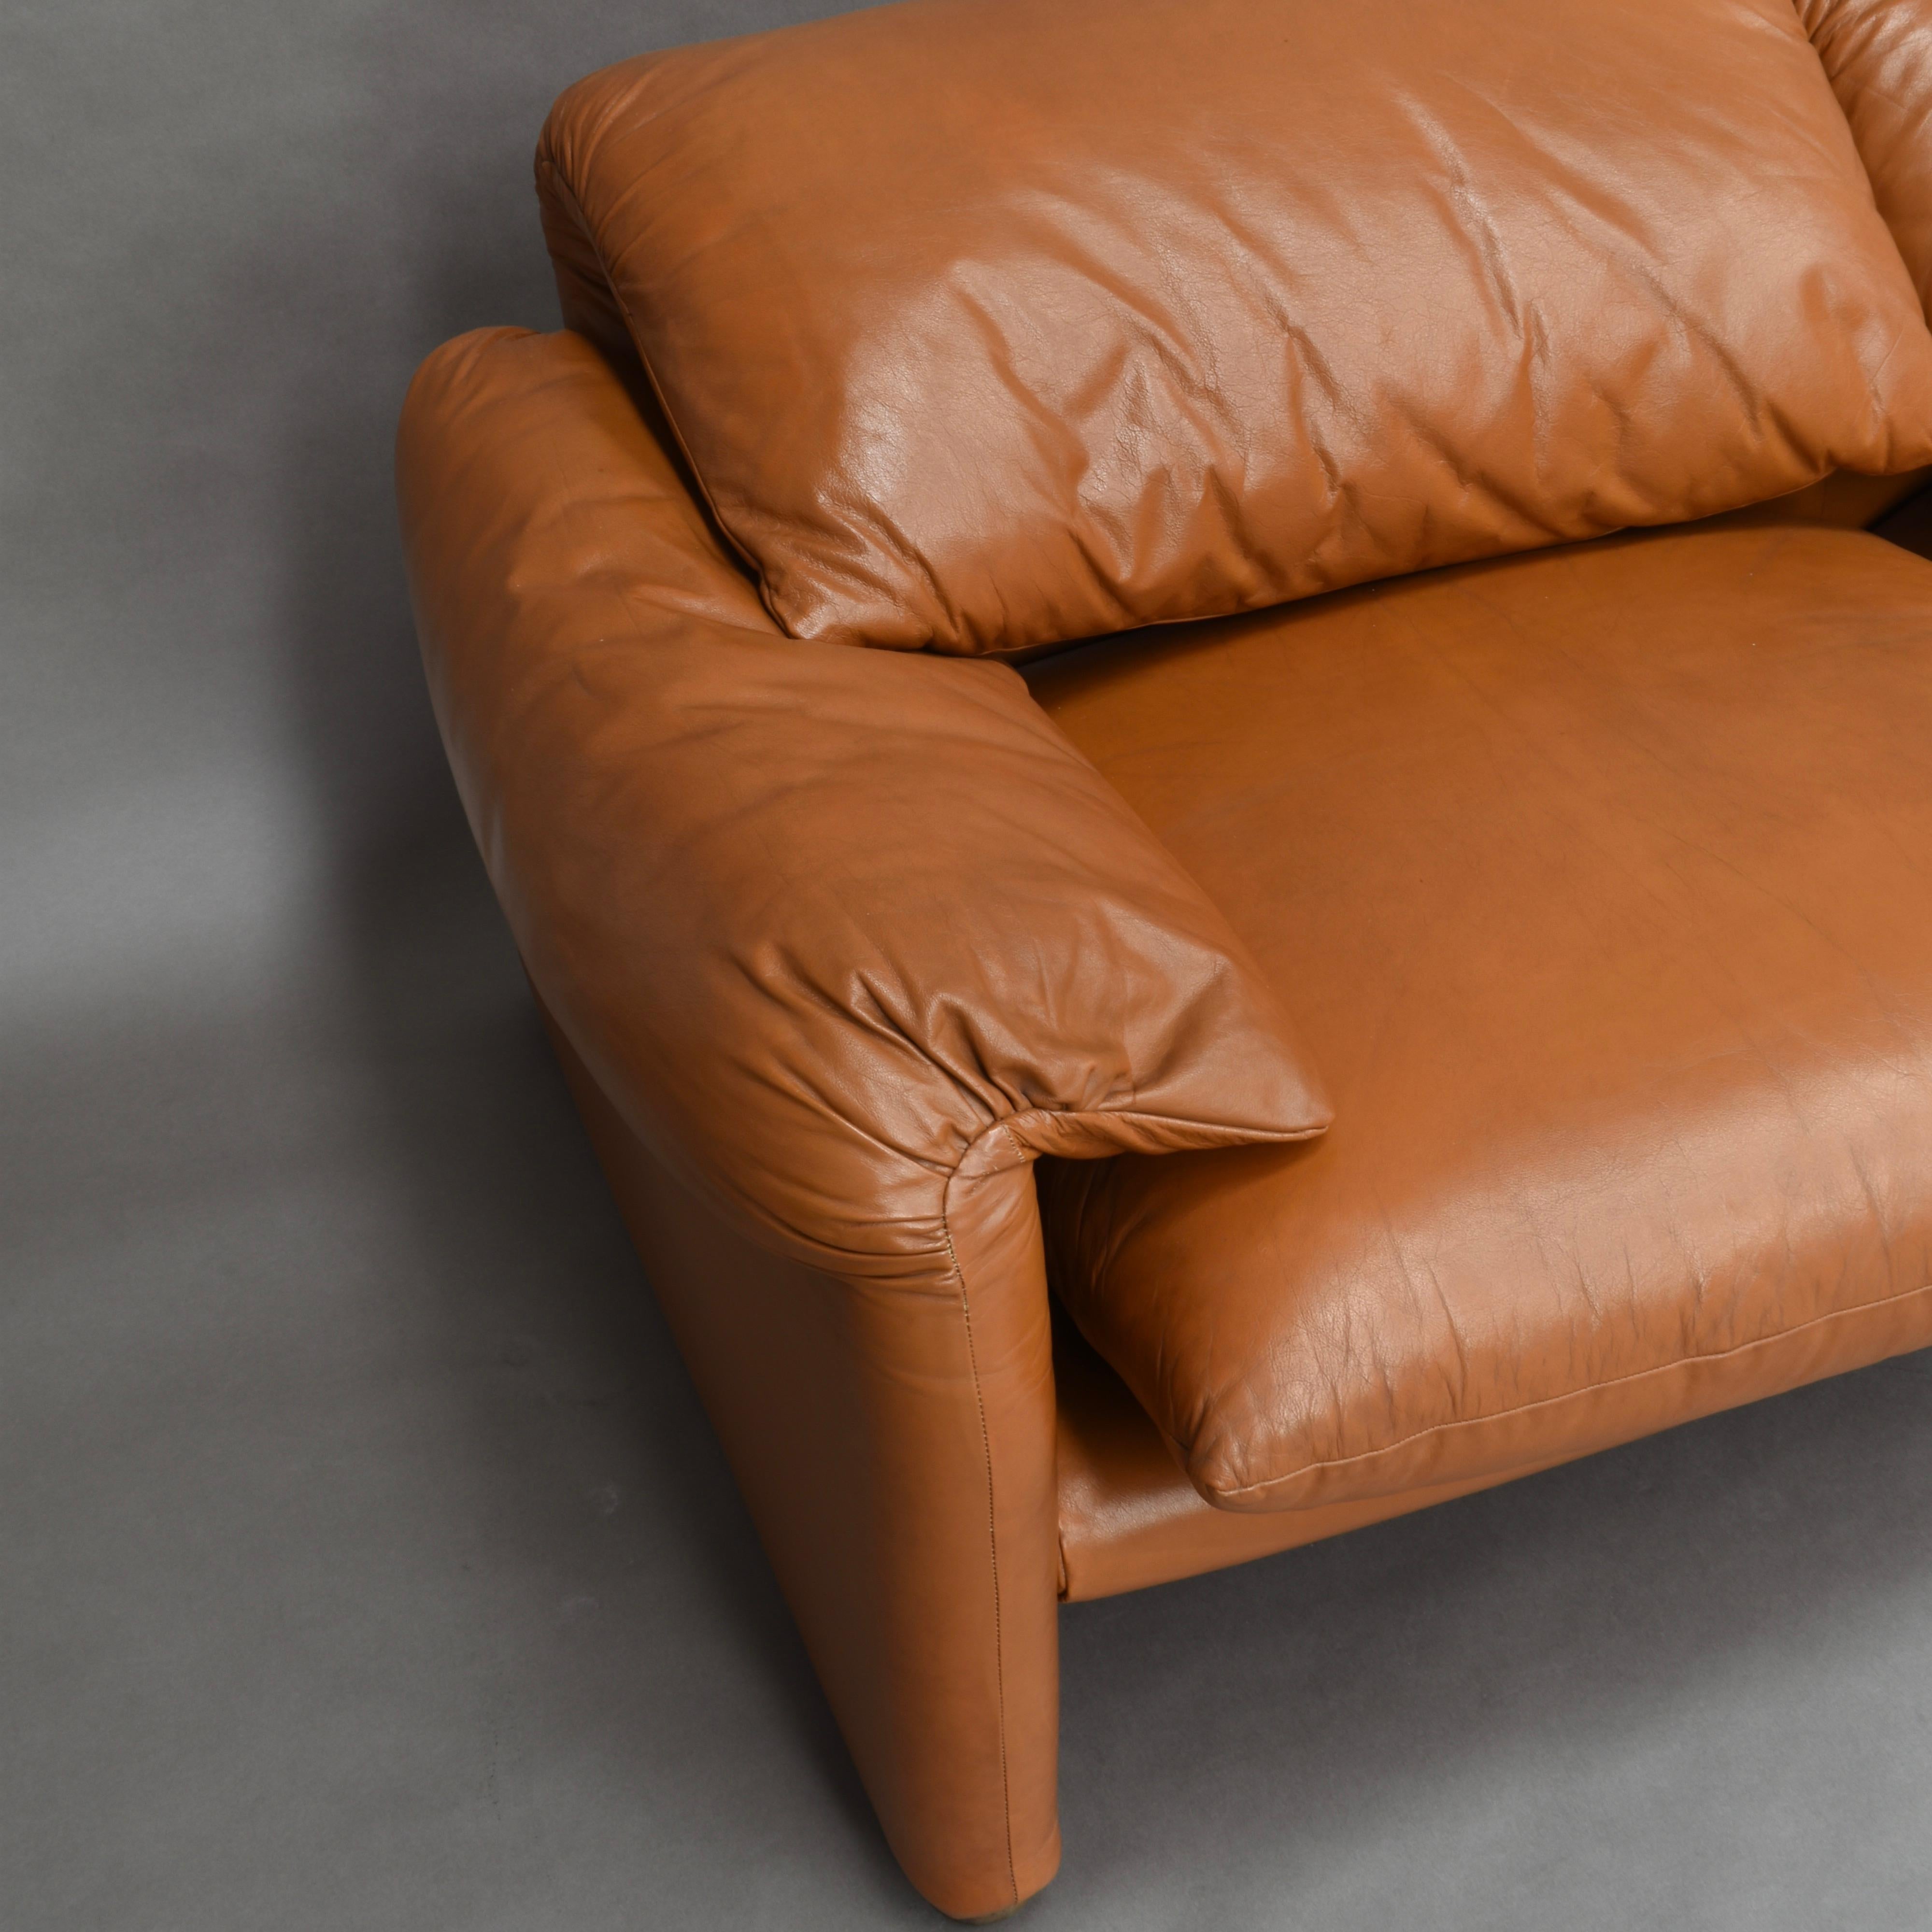 Late 20th Century Early Maralunga Sofa in Tan Leather by Vico Magistretti for Cassina, Italy, 1973